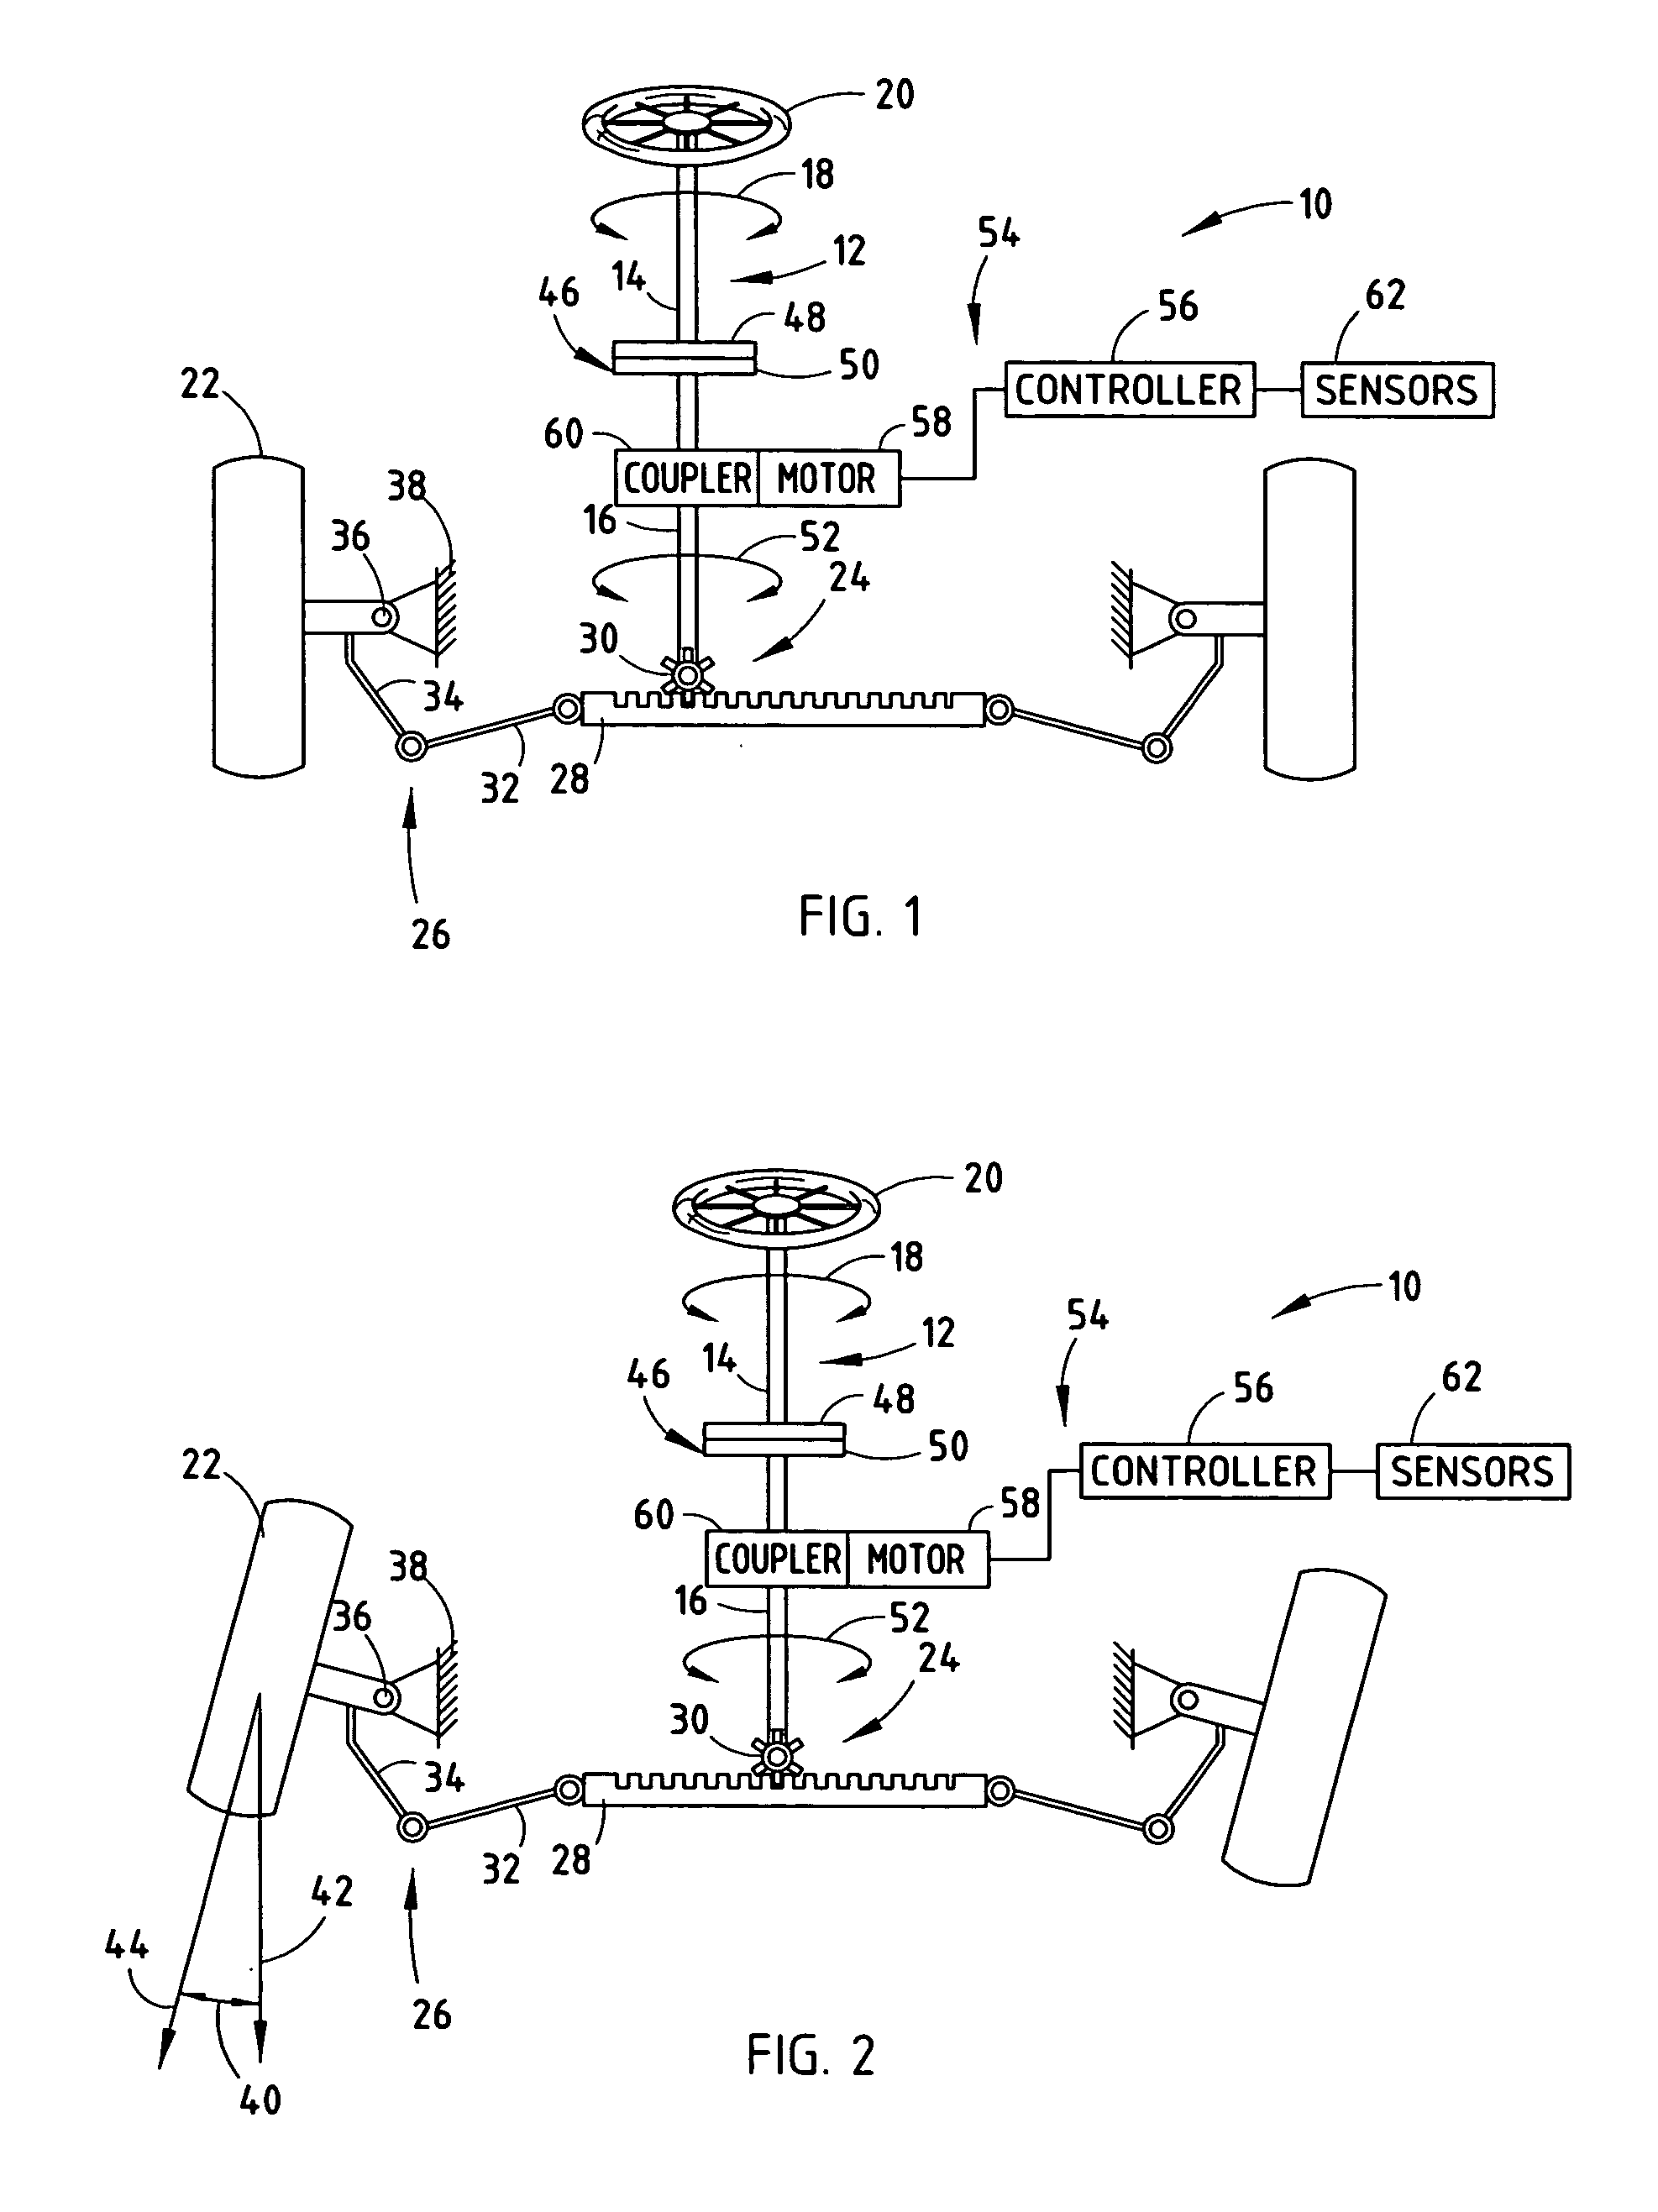 Vehicle steering system for kickback reduction